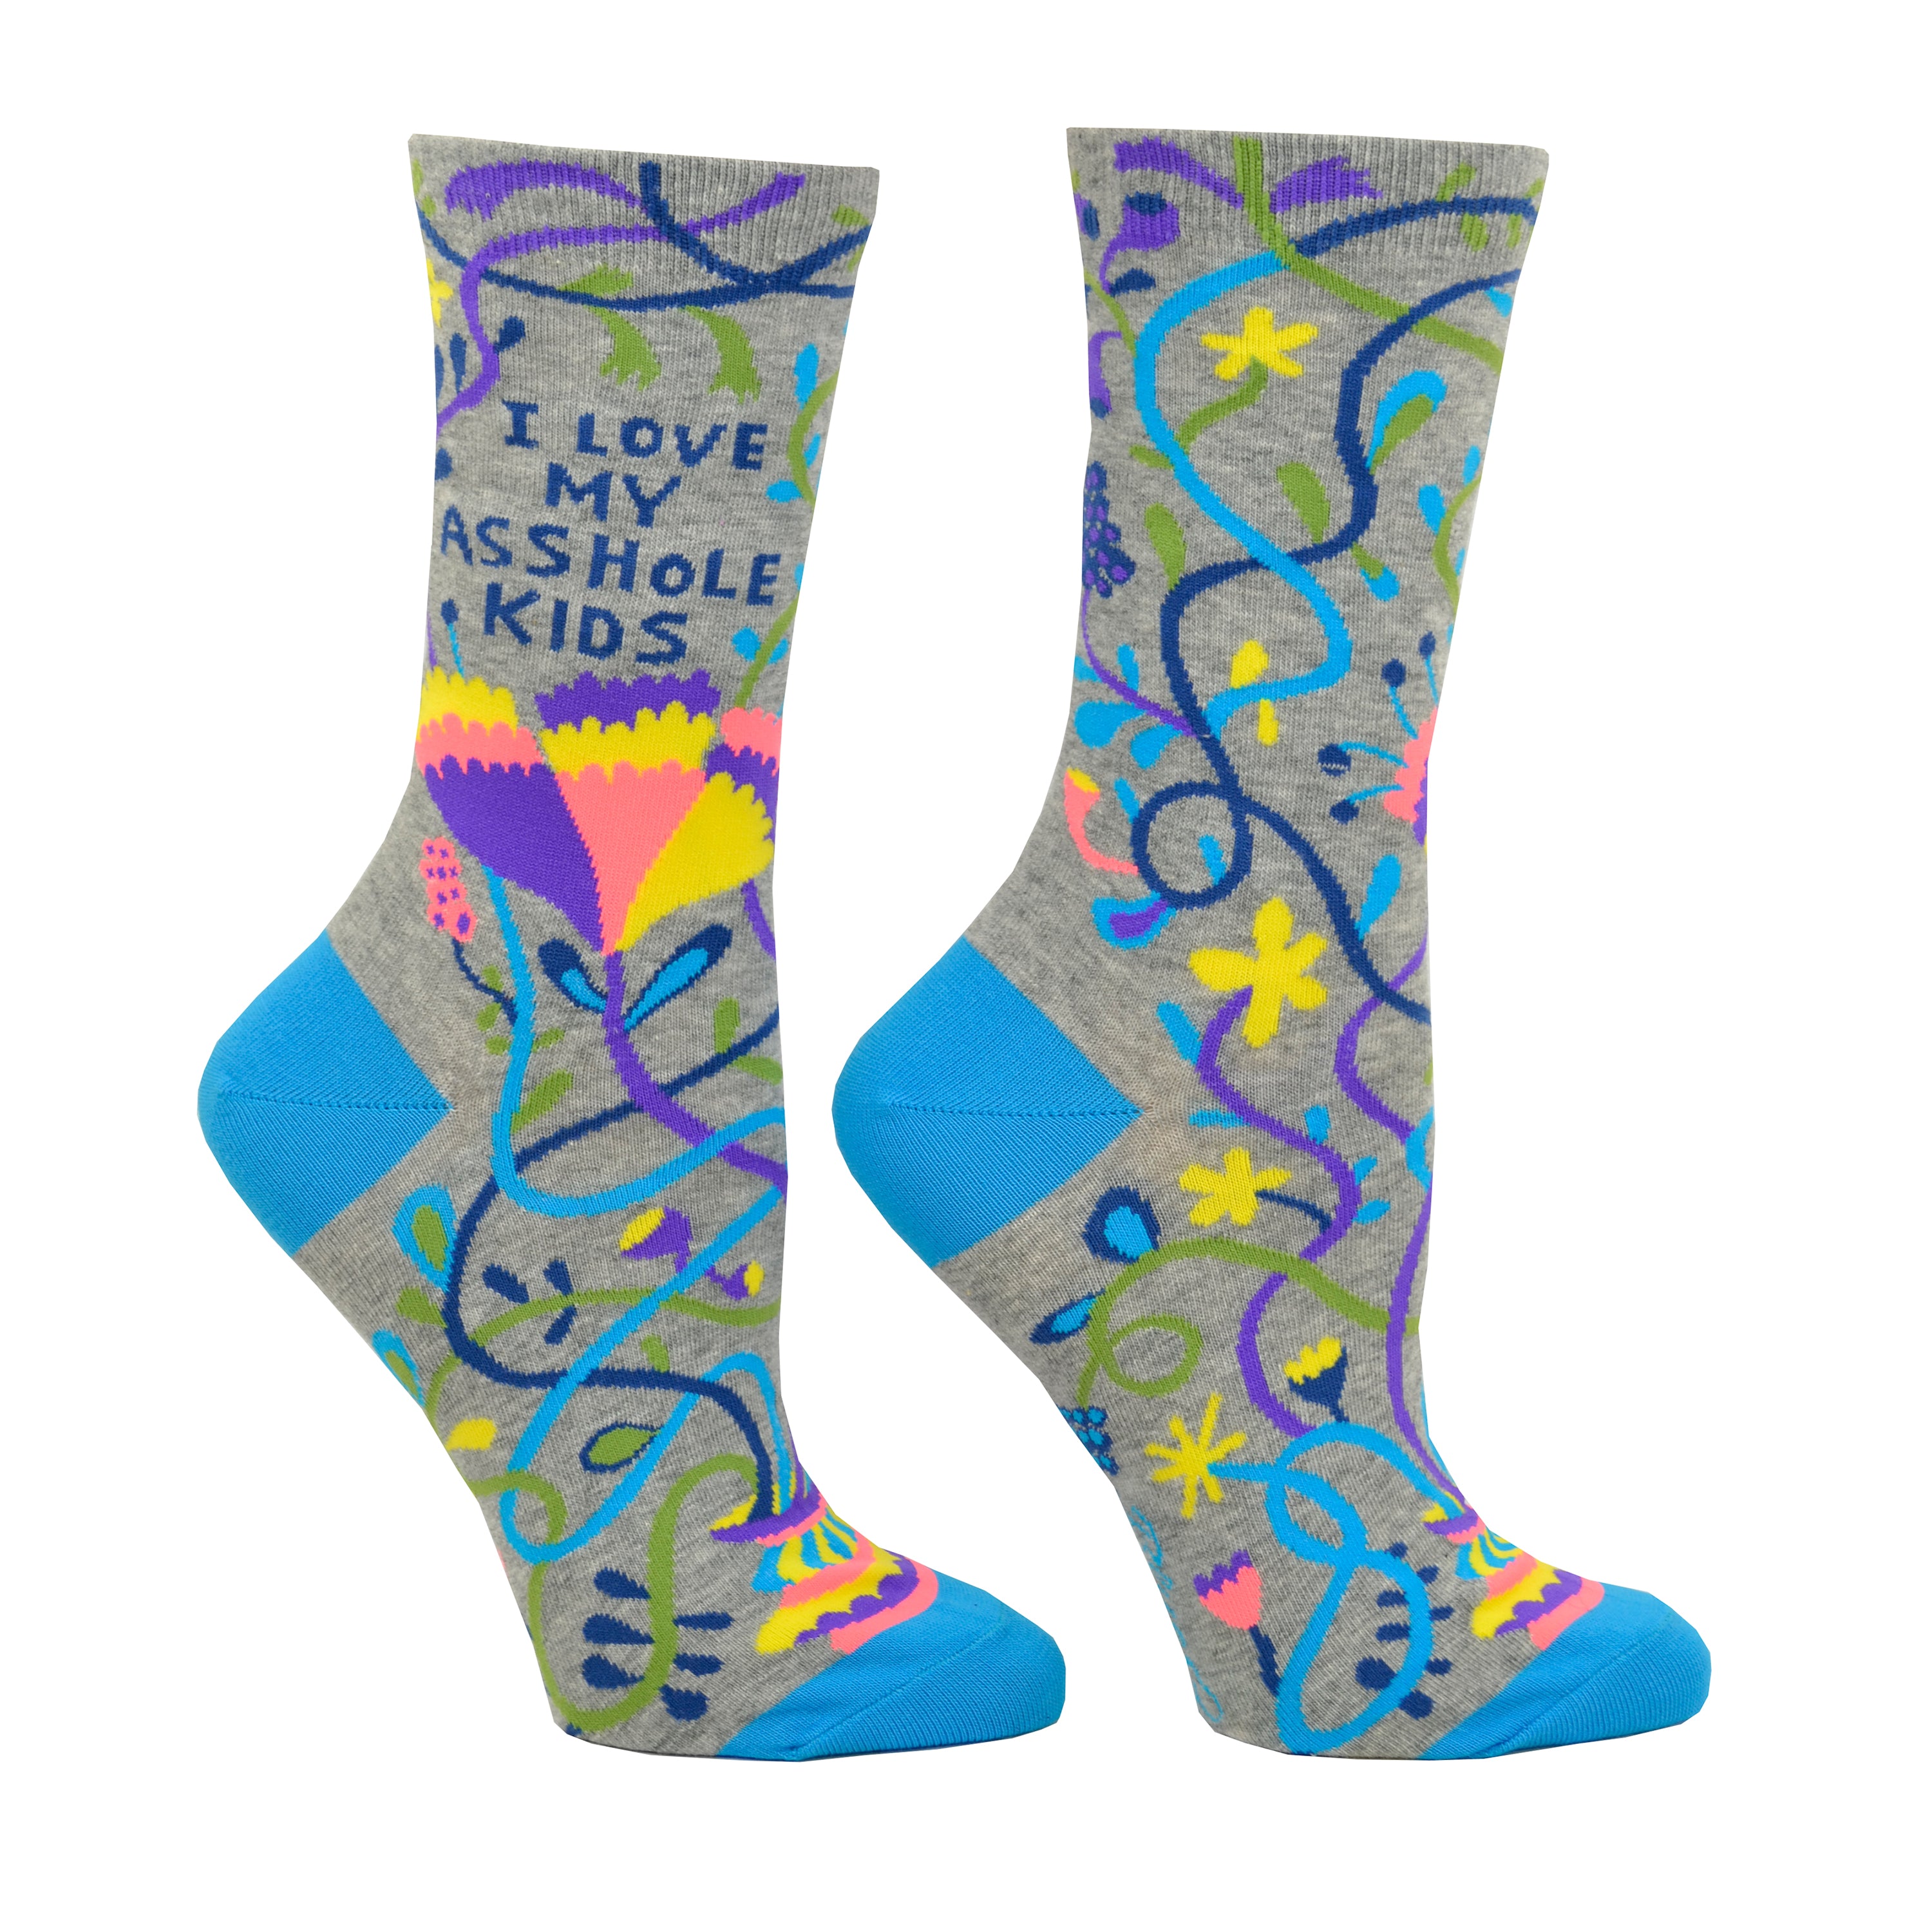 Shown on leg forms, a pair of women's Blue Q brand combed cotton crew sock in grey with a teal heel and toe. The socks feature an abstract floral design in yellow, purple, orange, and teal with the words, 